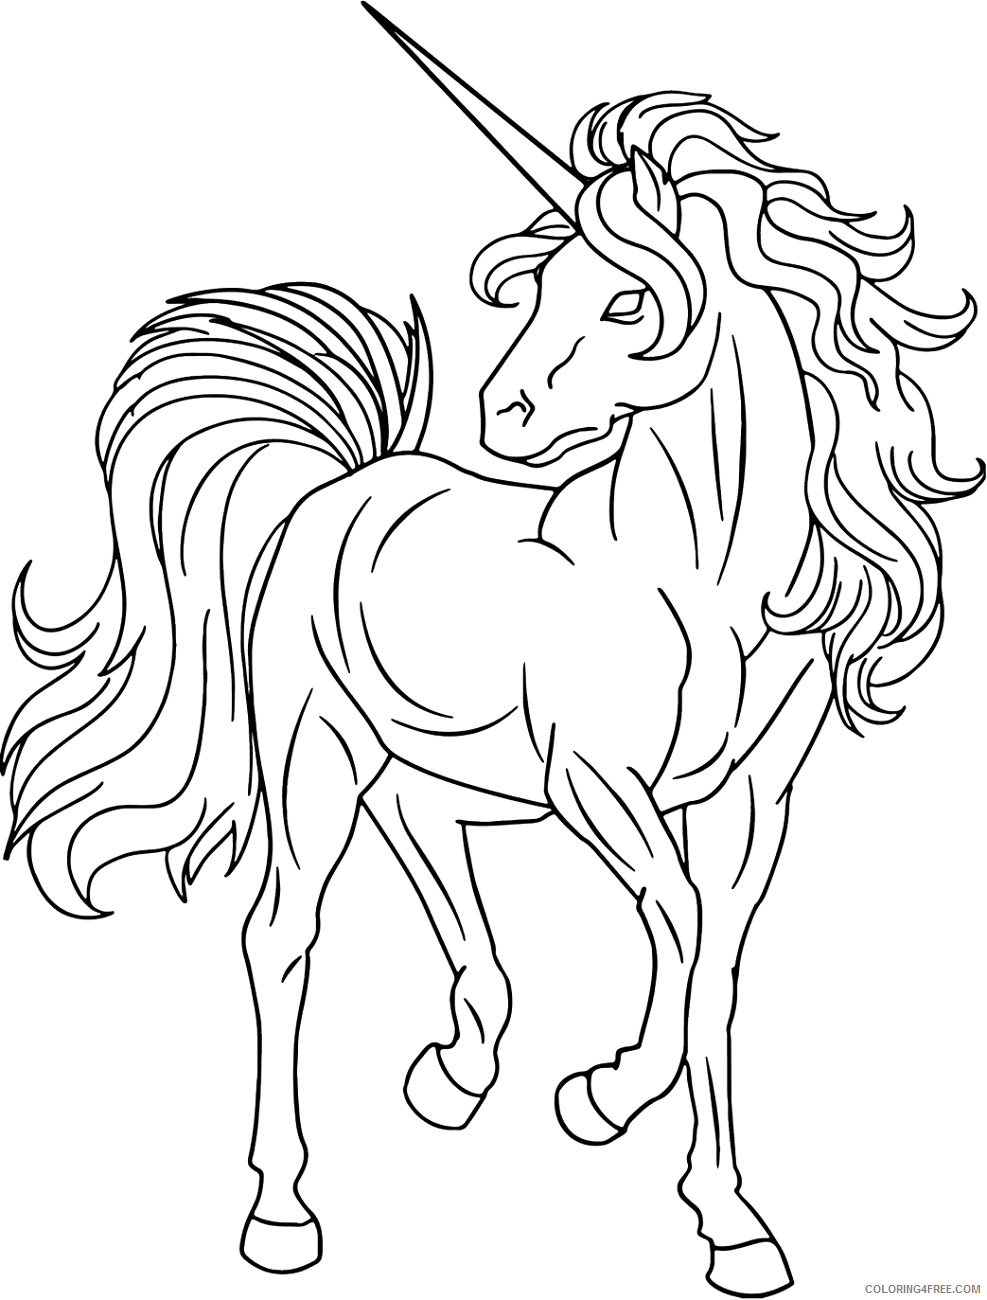 Unicorn Coloring Pages awesome_unicorn Printable 2021 6019 Coloring4free